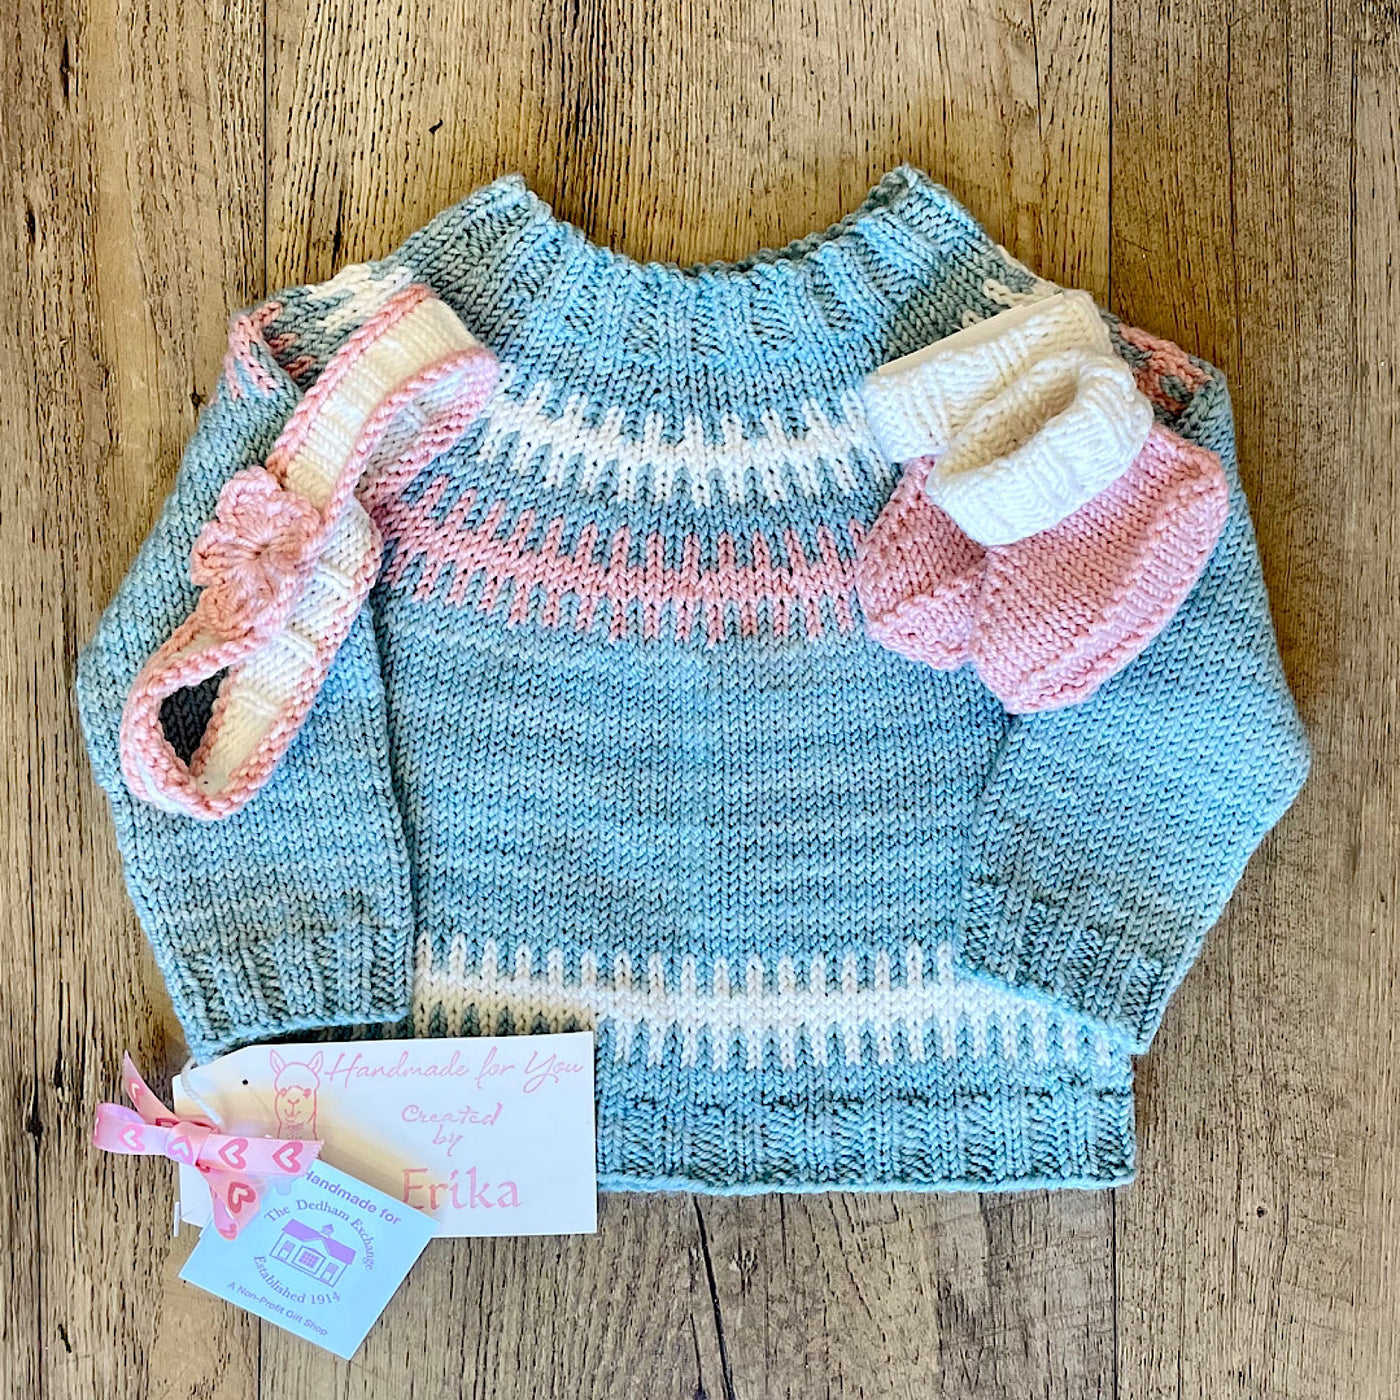 Hand Knit Teal Blue and Pink Sweater, Booties and Headband Set